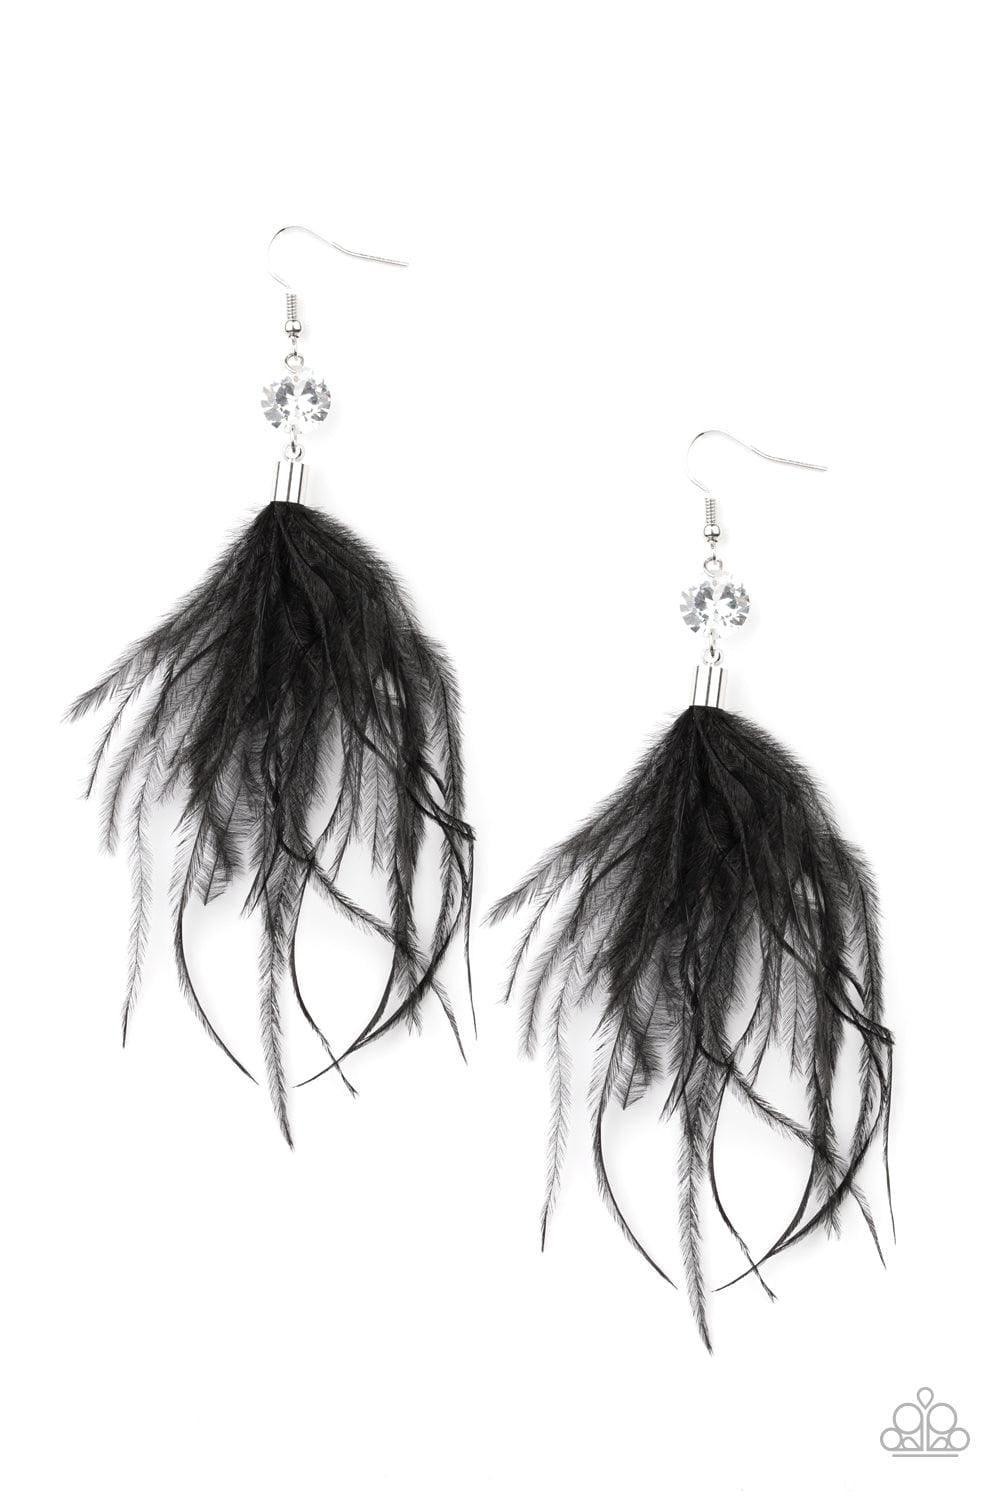 Paparazzi Accessories - Feathered Flamboyance - Black Earrings - Bling by JessieK